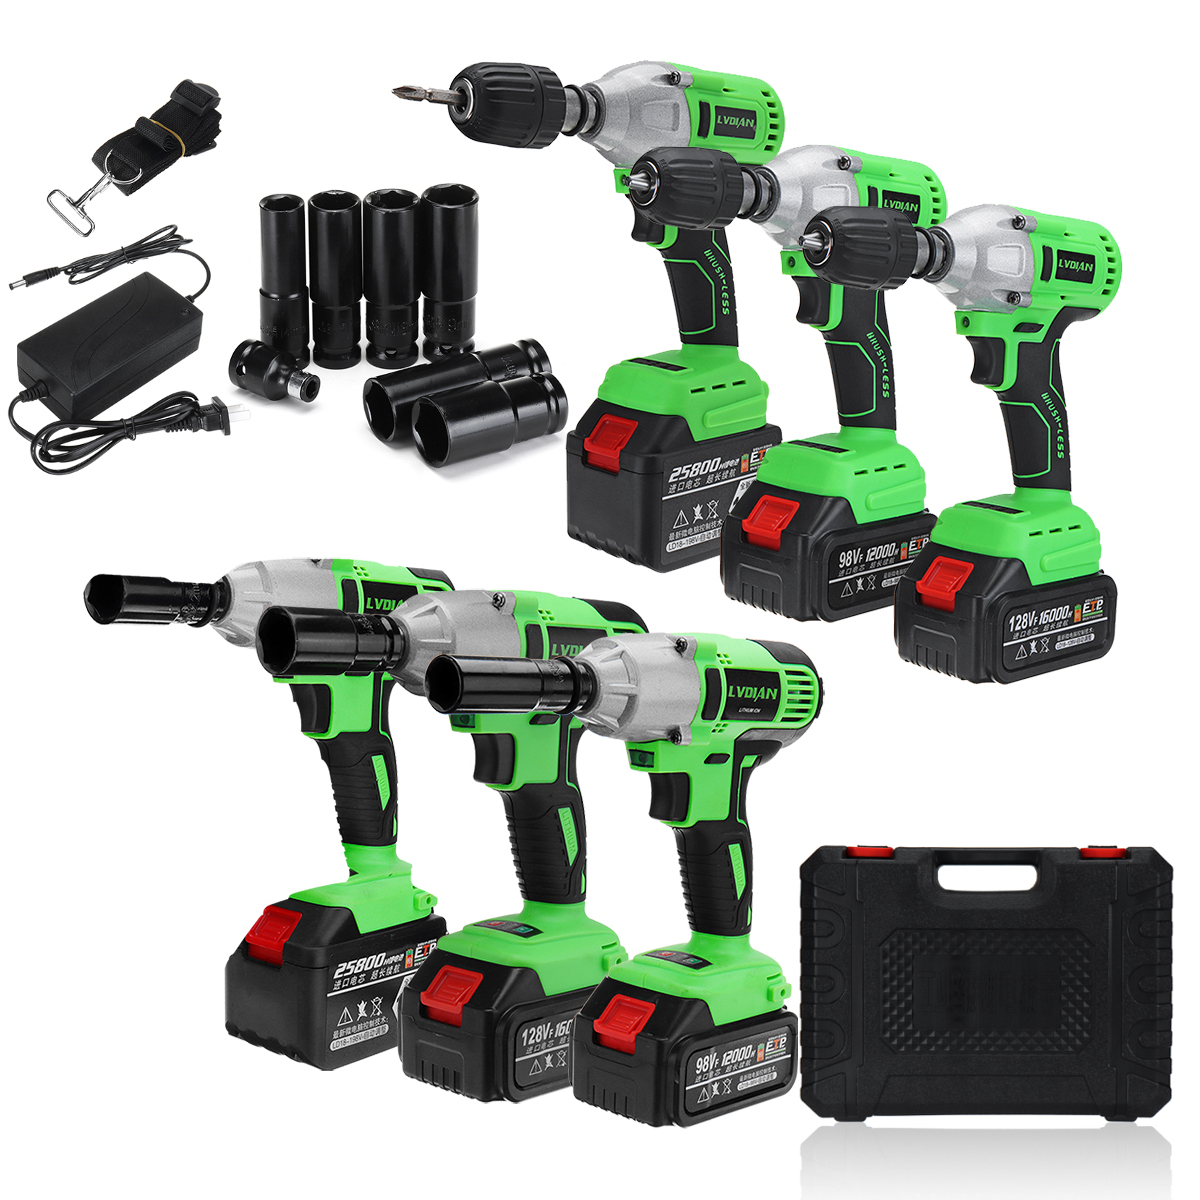 98128188VF-Brushless-Cordless-Impact-Wrench-Drill-LED-Light-Li-Ion-Battery-Electric-Impact-Wrench-1404354-7